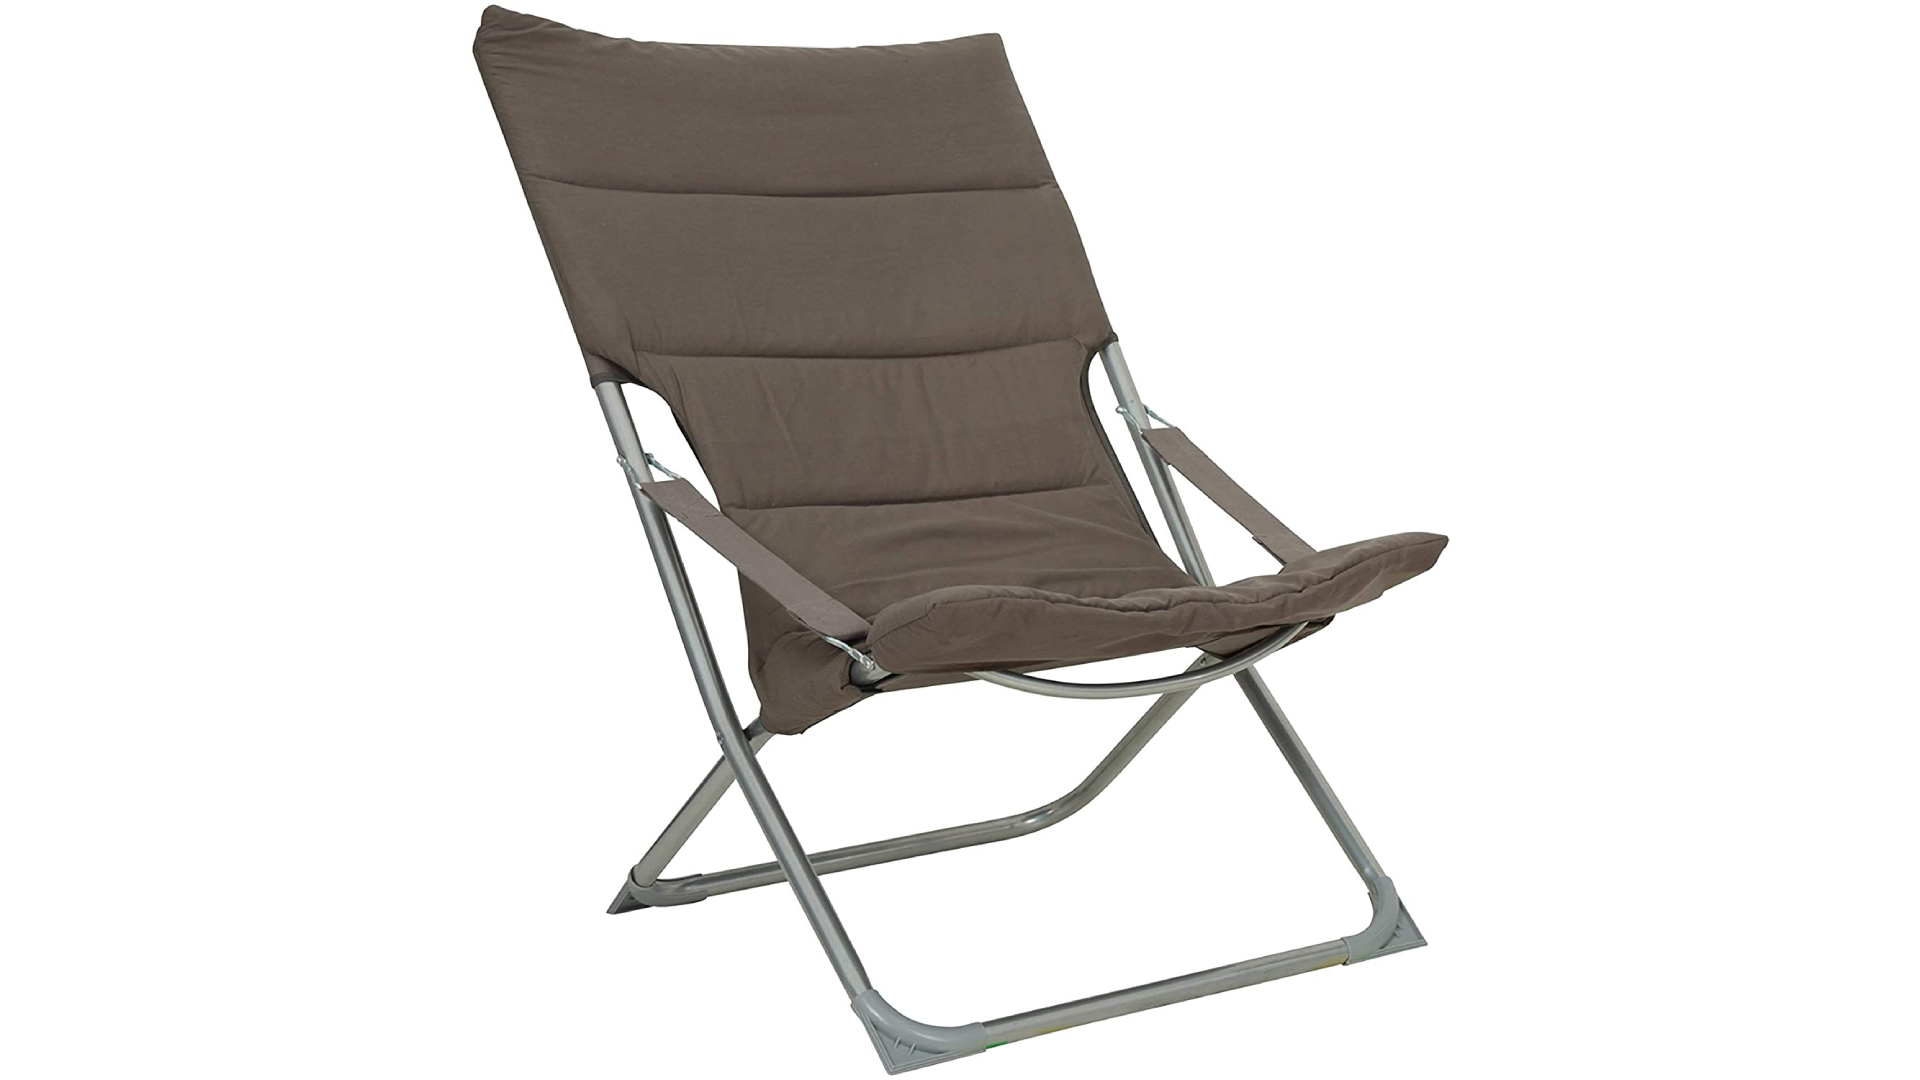 Mountain Warehouse Soft Padded Folding Armchair review: a simple